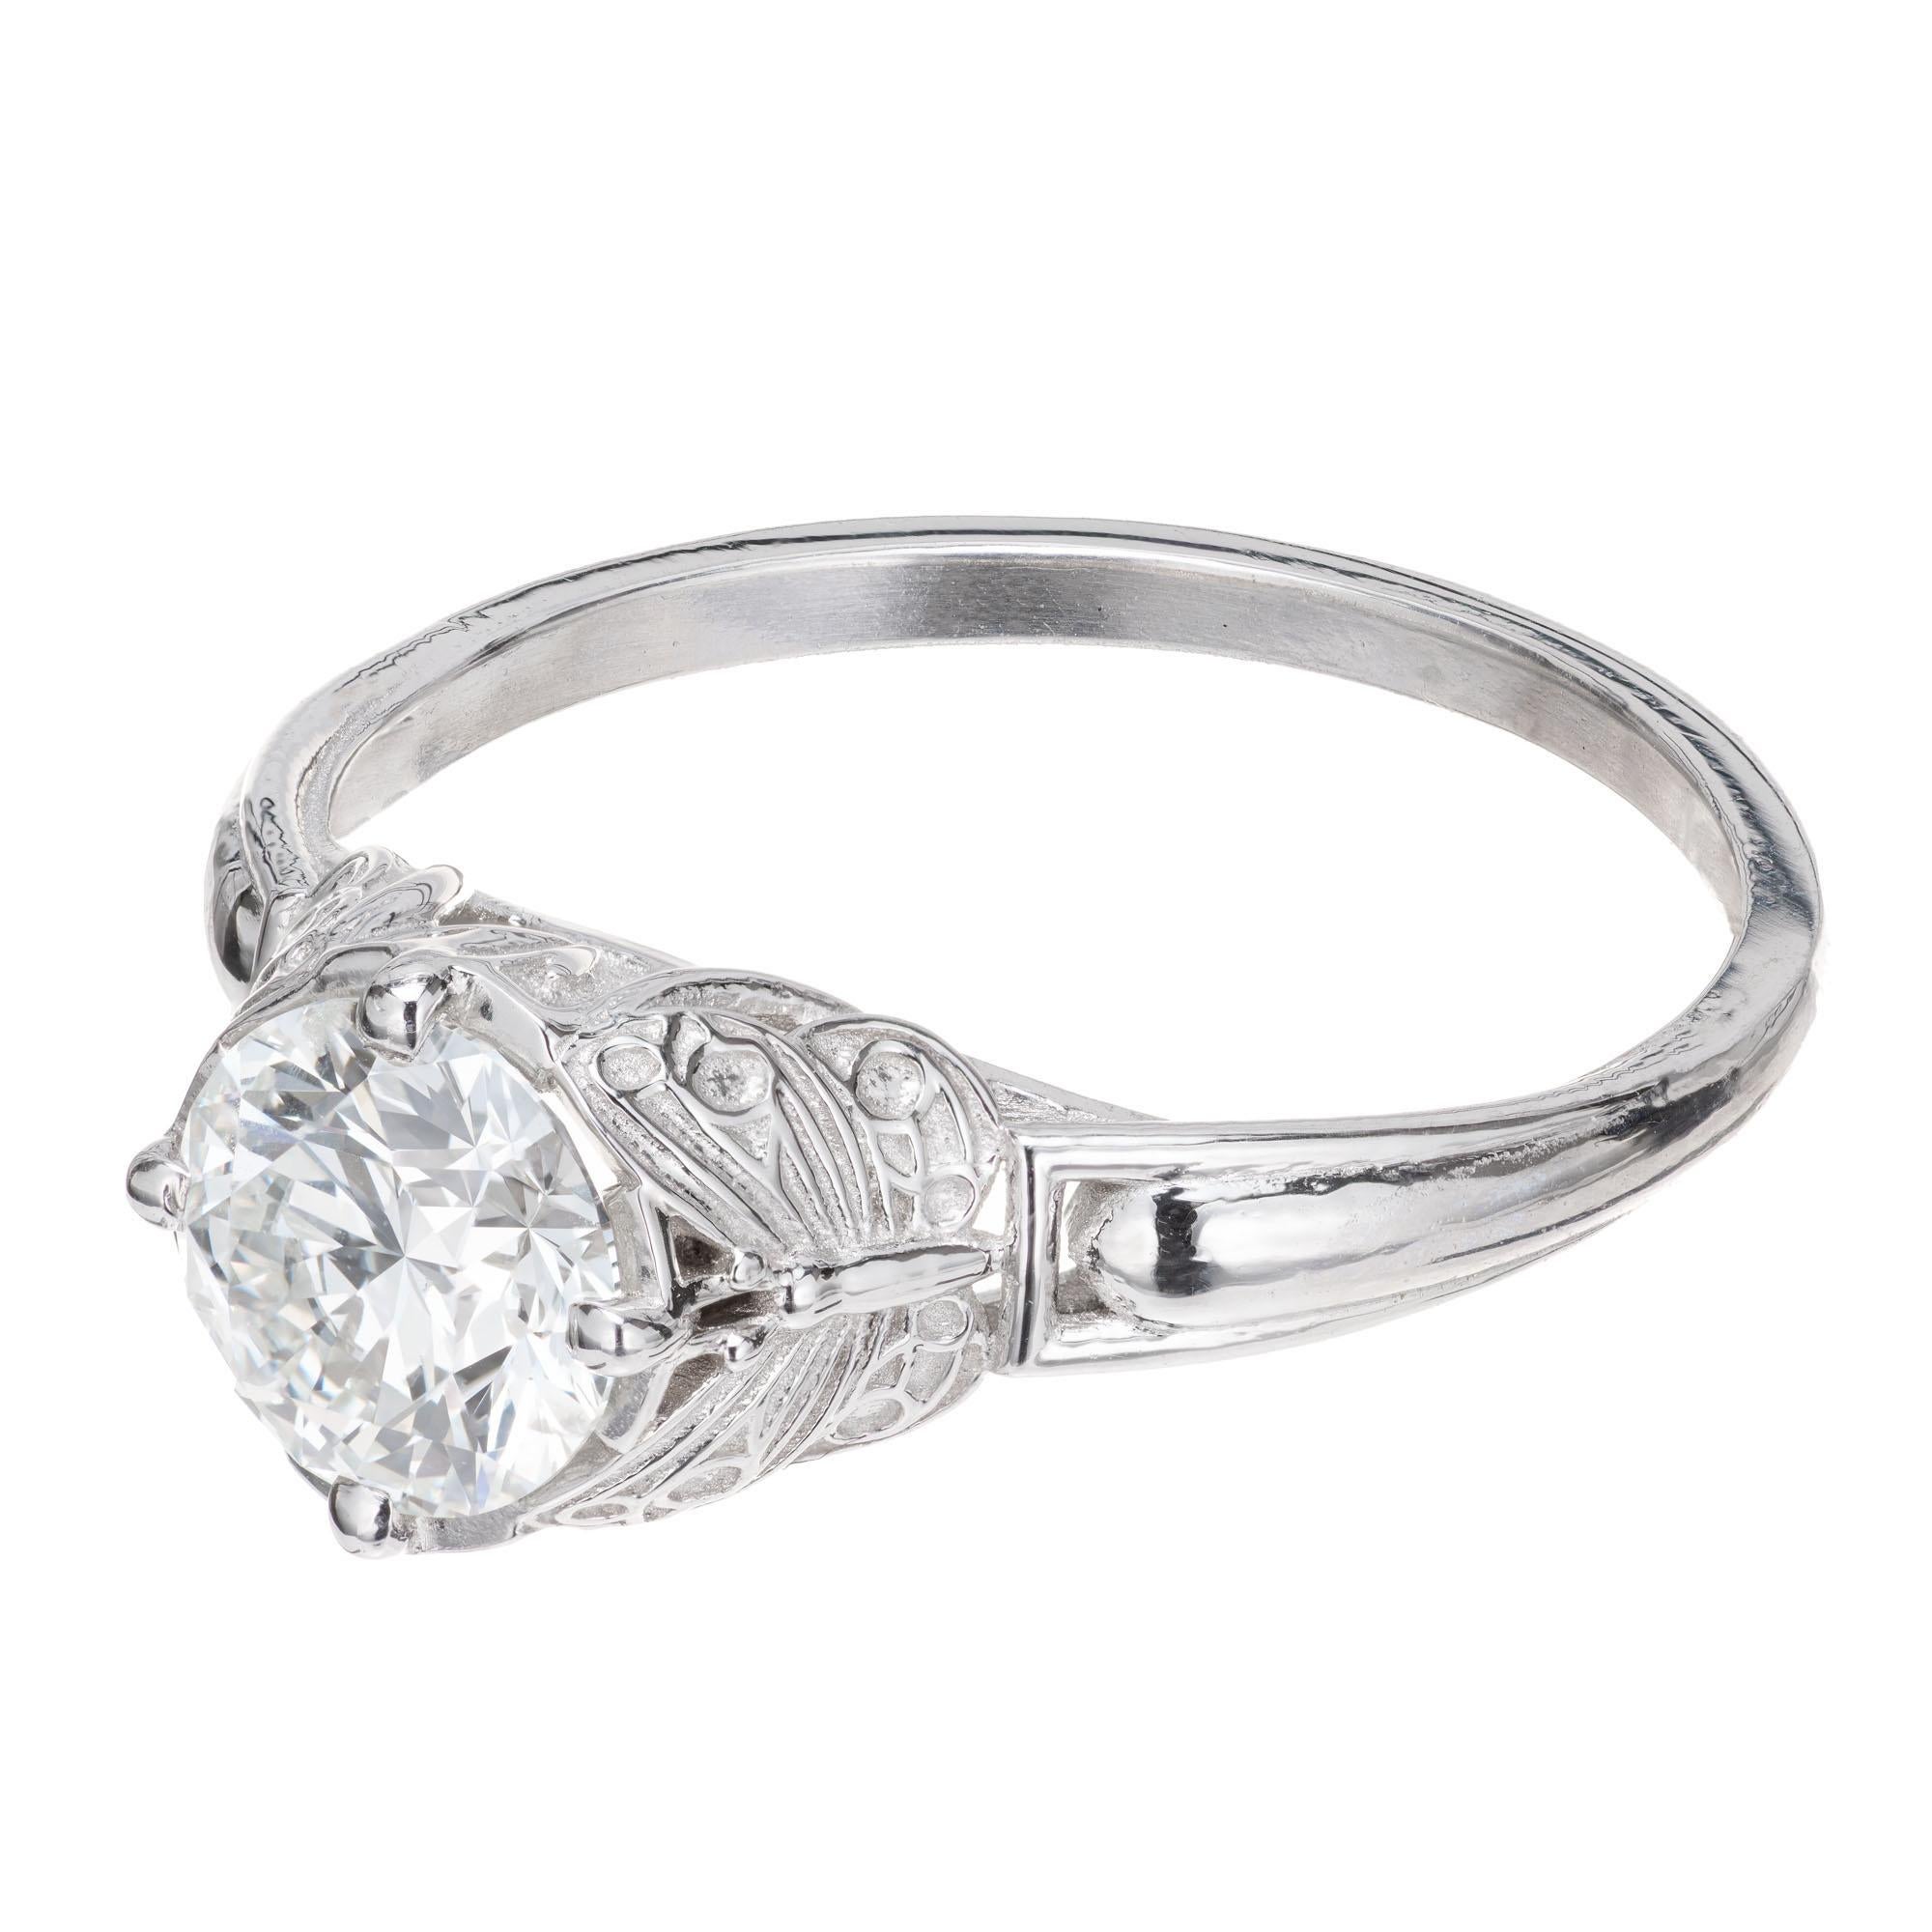 Ideal cut GIA certified 1.00ct diamond engagement ring. GIA certified center diamond in a platinum setting, designed an crafted in the Peter Suchy Workshop. 

1 round brilliant cut diamond G SI2, approx. 1.00ct GIA Certificate # 17433878
Size 6.5